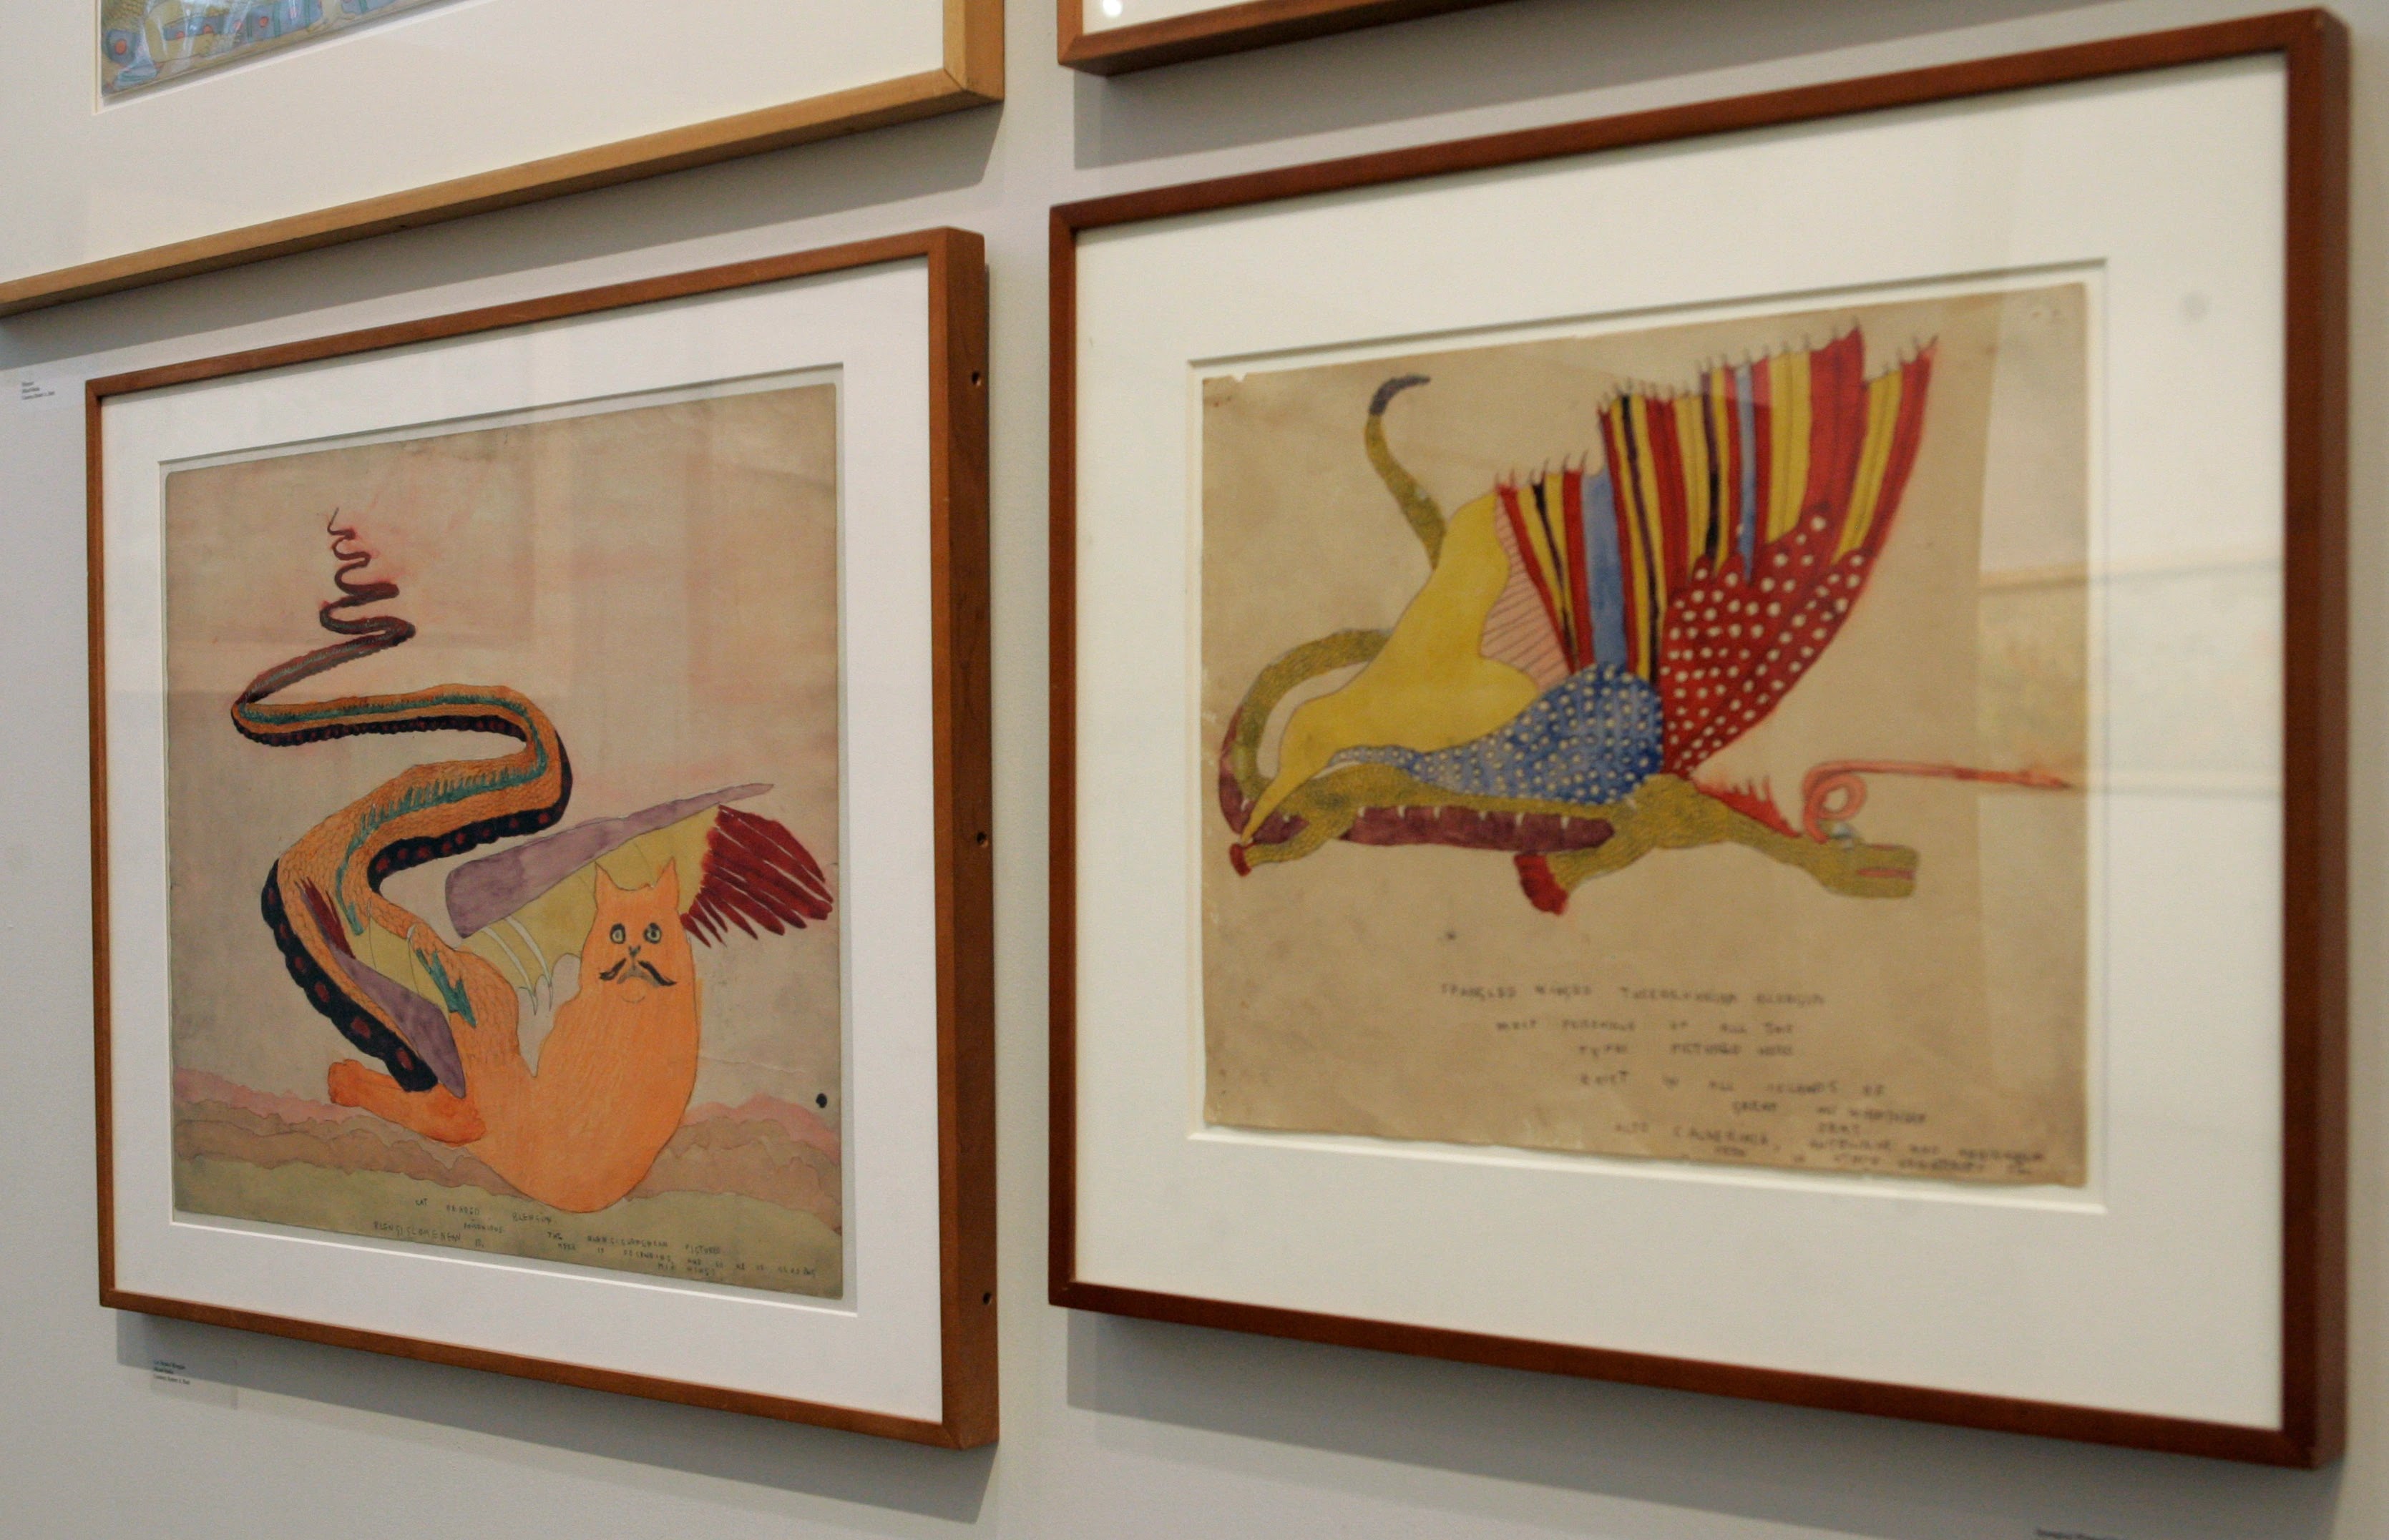 Illustrations by Henry Darger on display at Intuit: The Center for Intuitive and Outsider Art in Chicago.